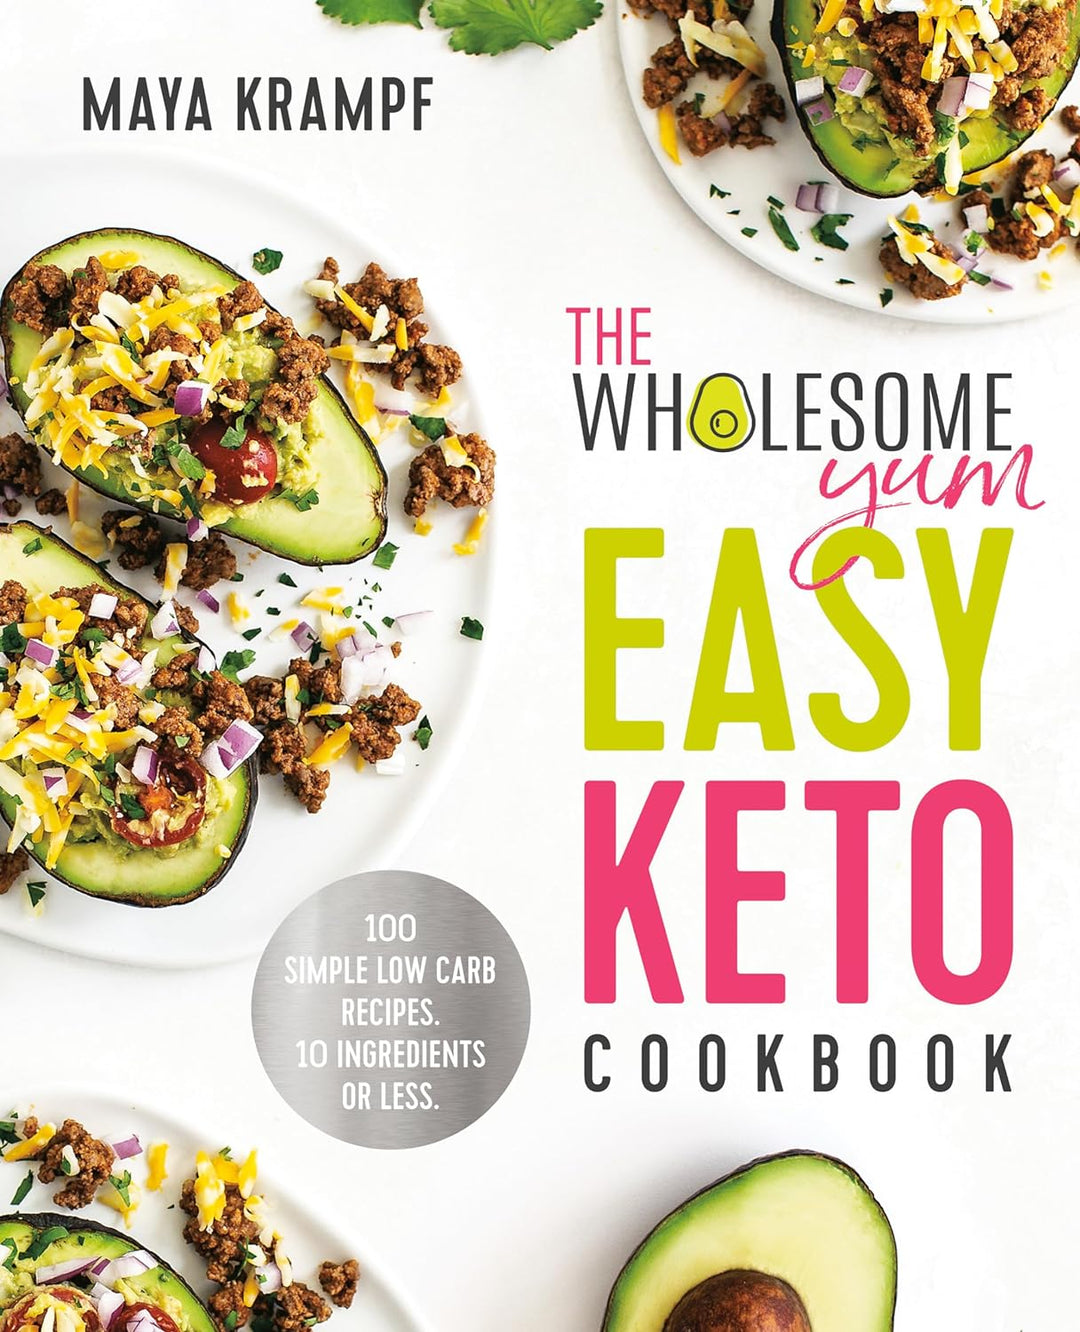 The Wholesome Yum Easy Keto Cookbook - Hardback - Love Low Carb